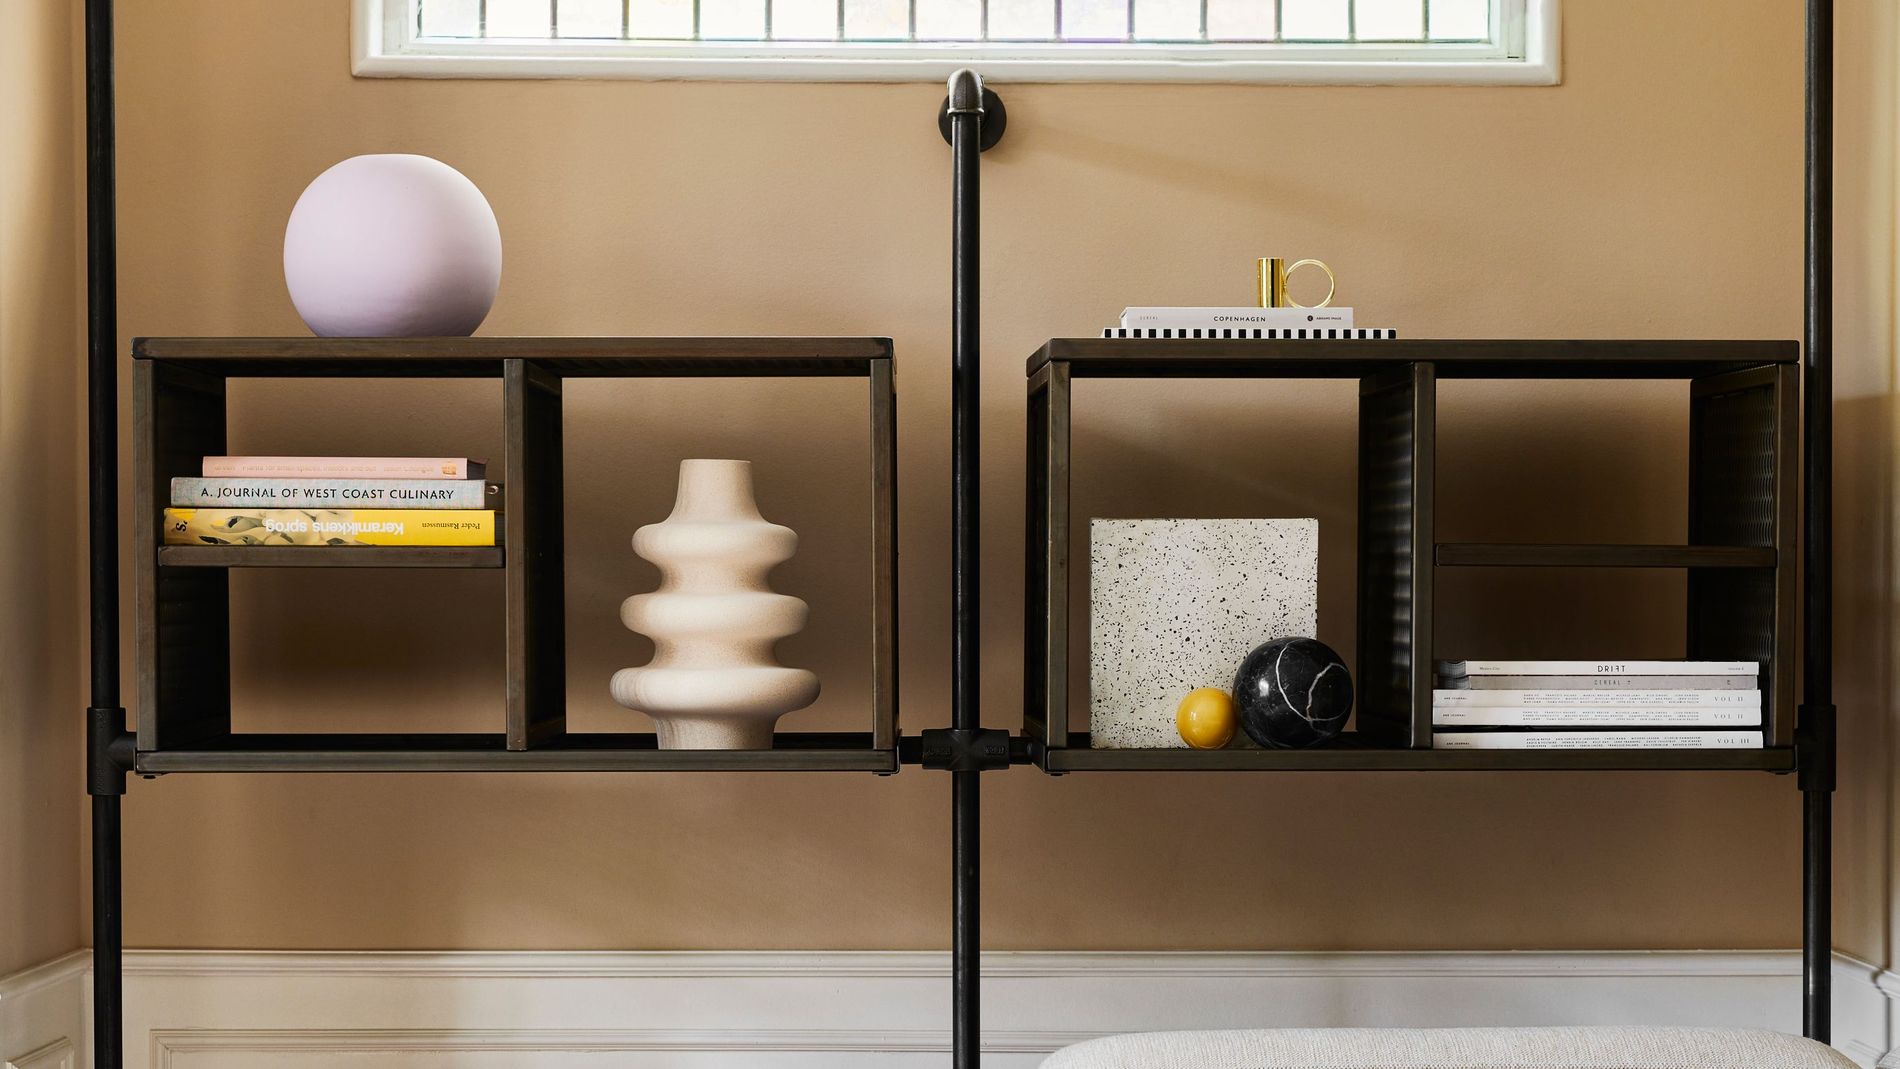 Interior news: Soeren Le Schmidt's favourite wardrobe system just launched  a new cabinet collection - Vogue Scandinavia